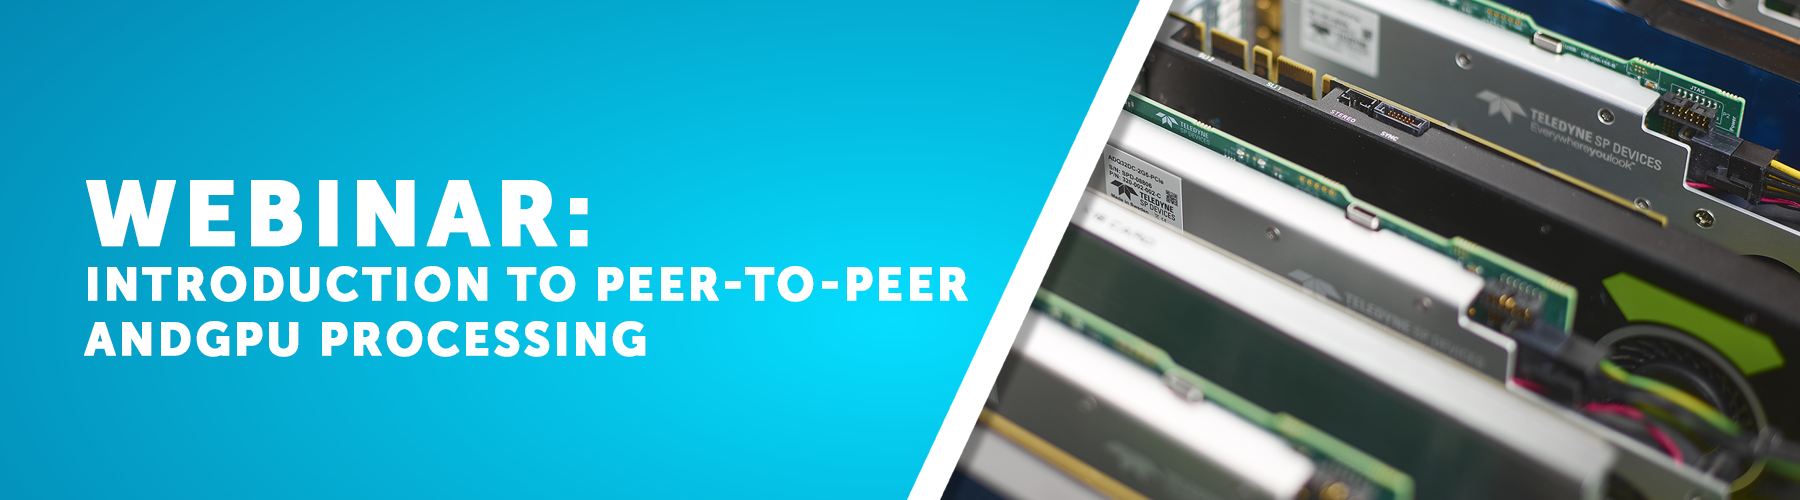 Introduction to Peer-to-Peer and GPU Processing banner